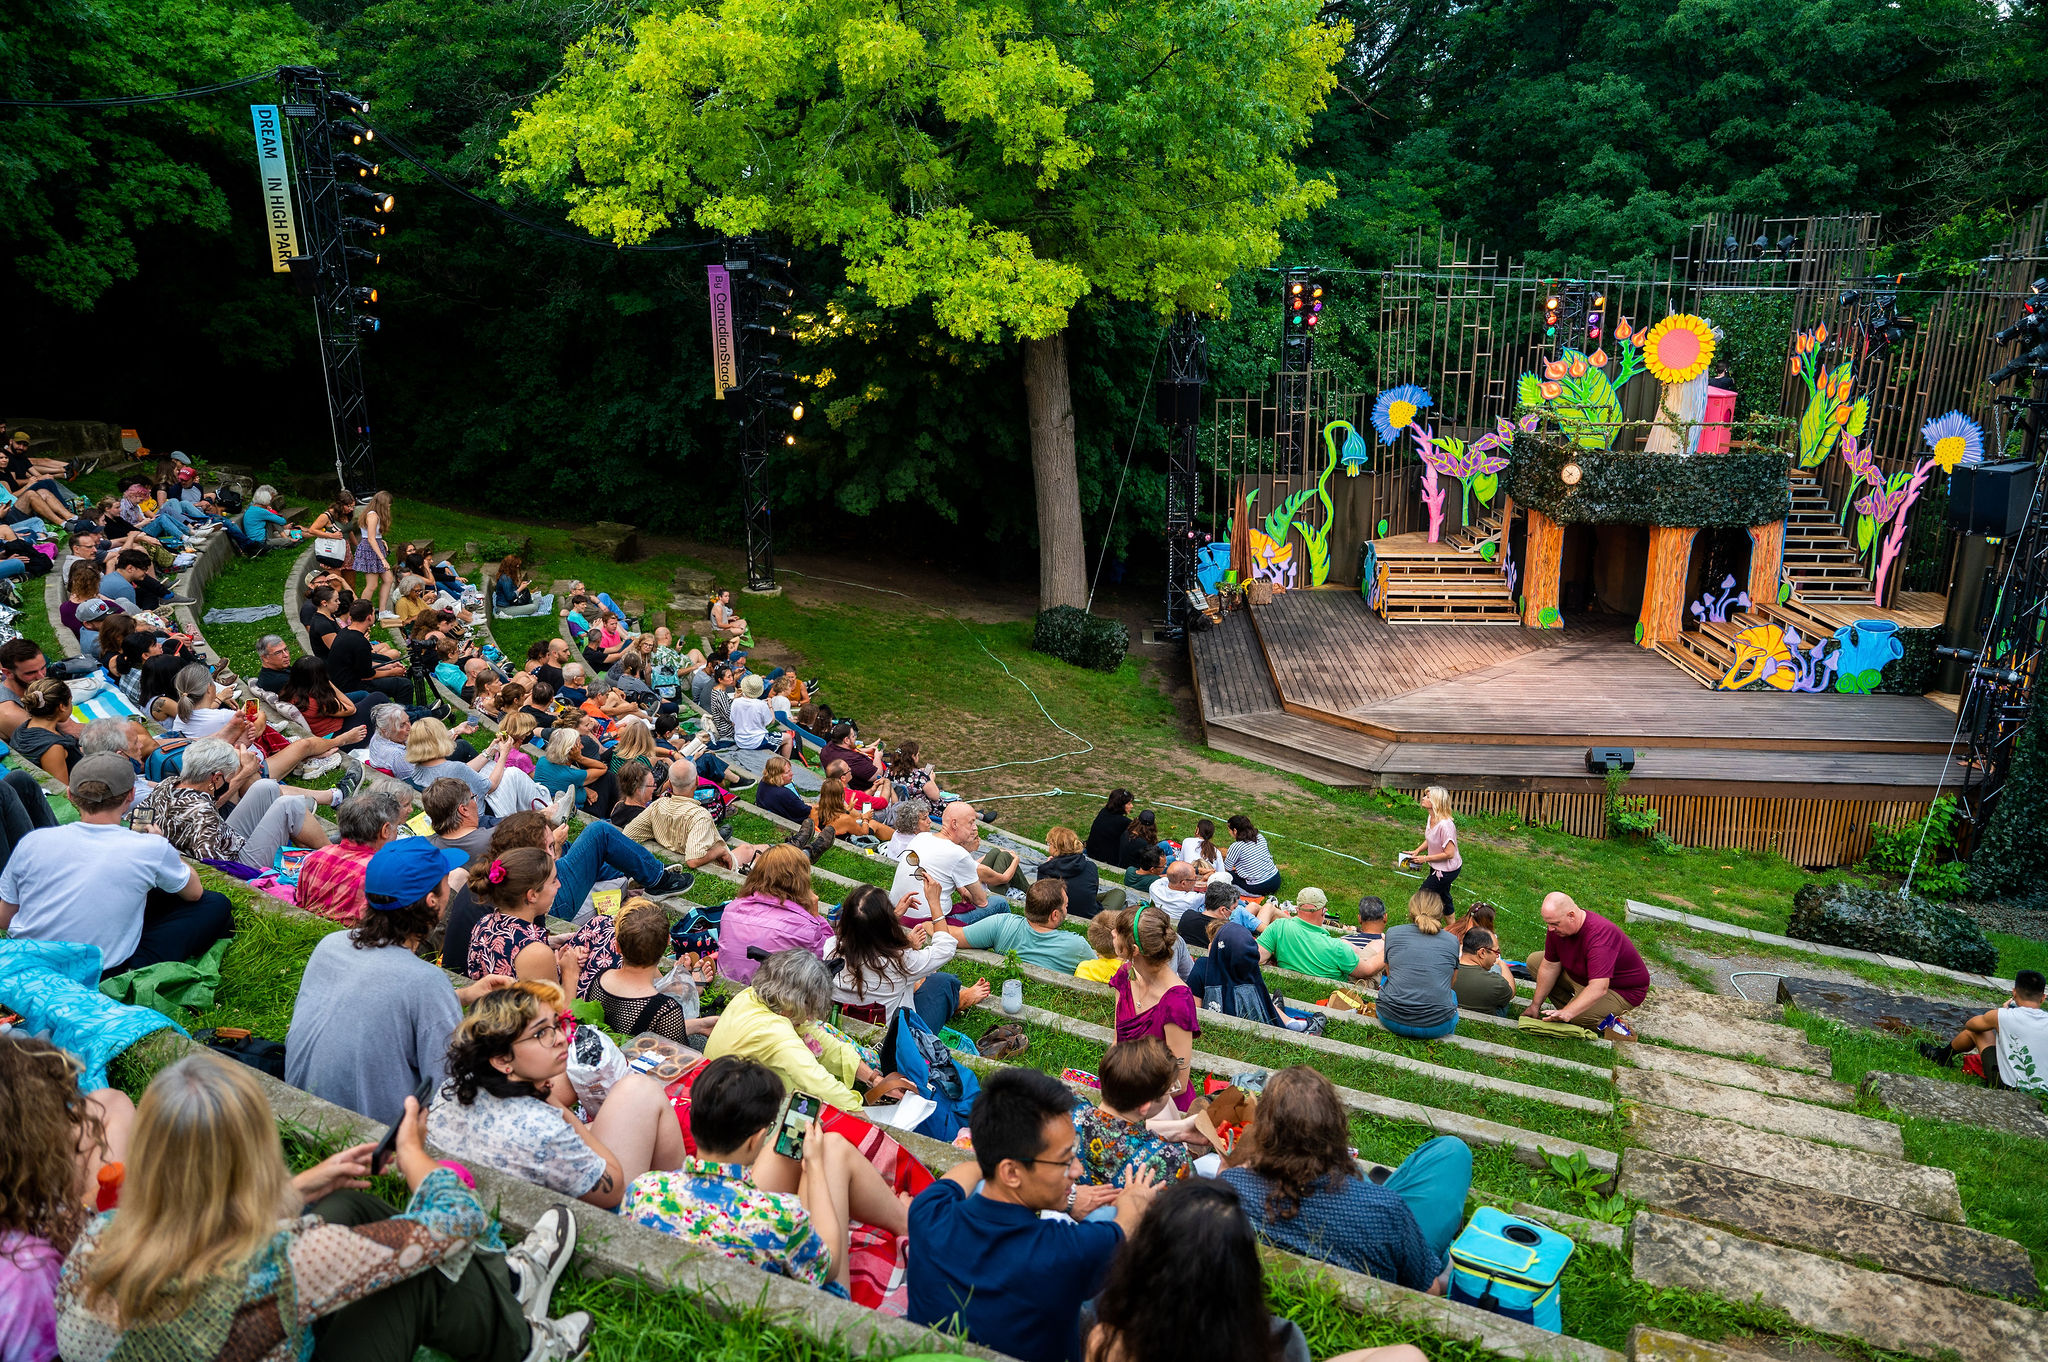 A full audience waits to watch the summer production of As You Like It in Dream in High Park's 2022 programming. The stage is covered with large, colourful flowers. Image courtesy of Canadian Stage.